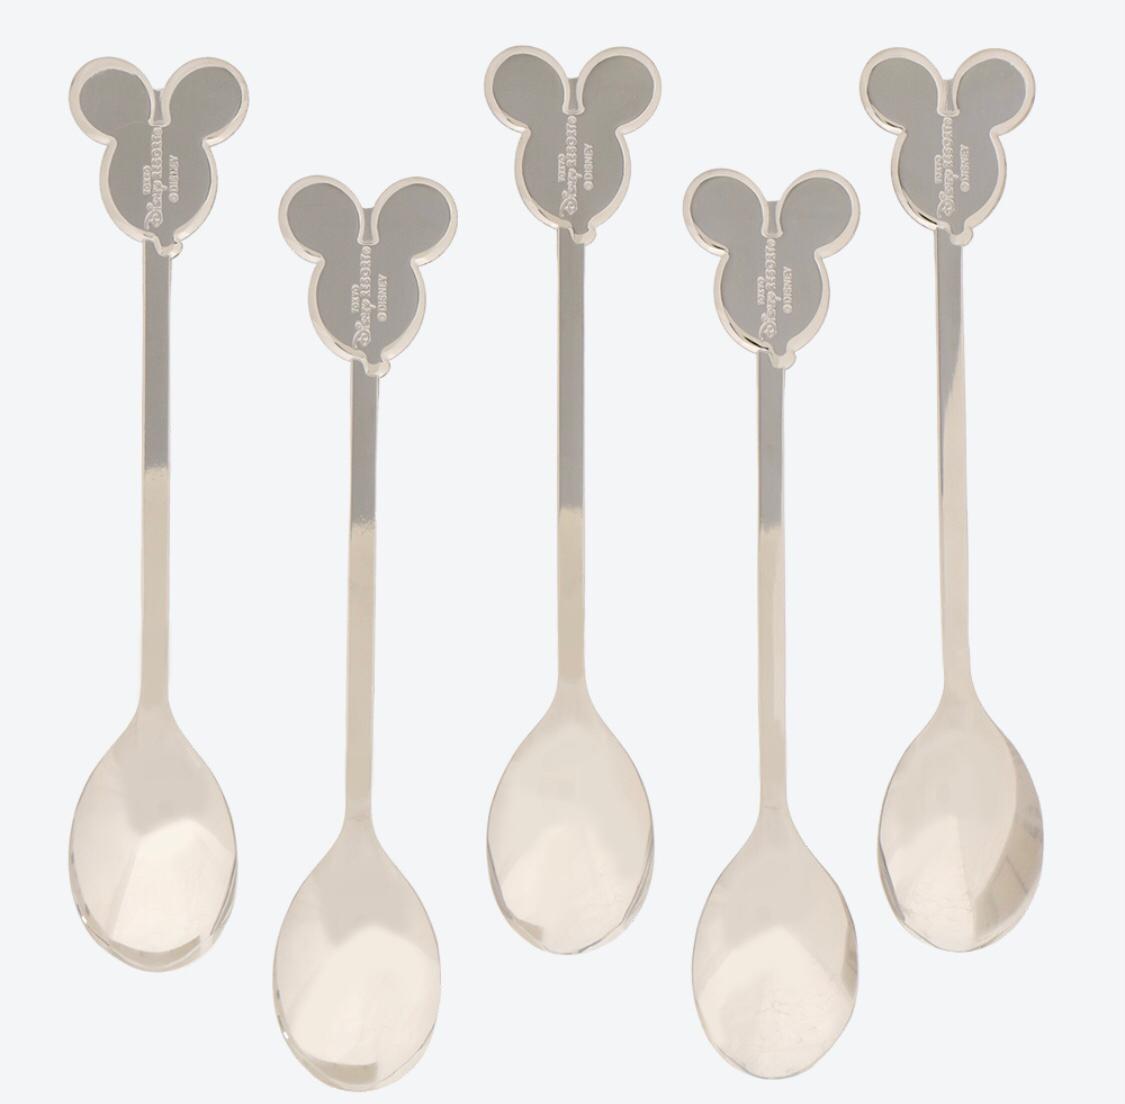 TDR - Happiness in the Sky - Spoon set